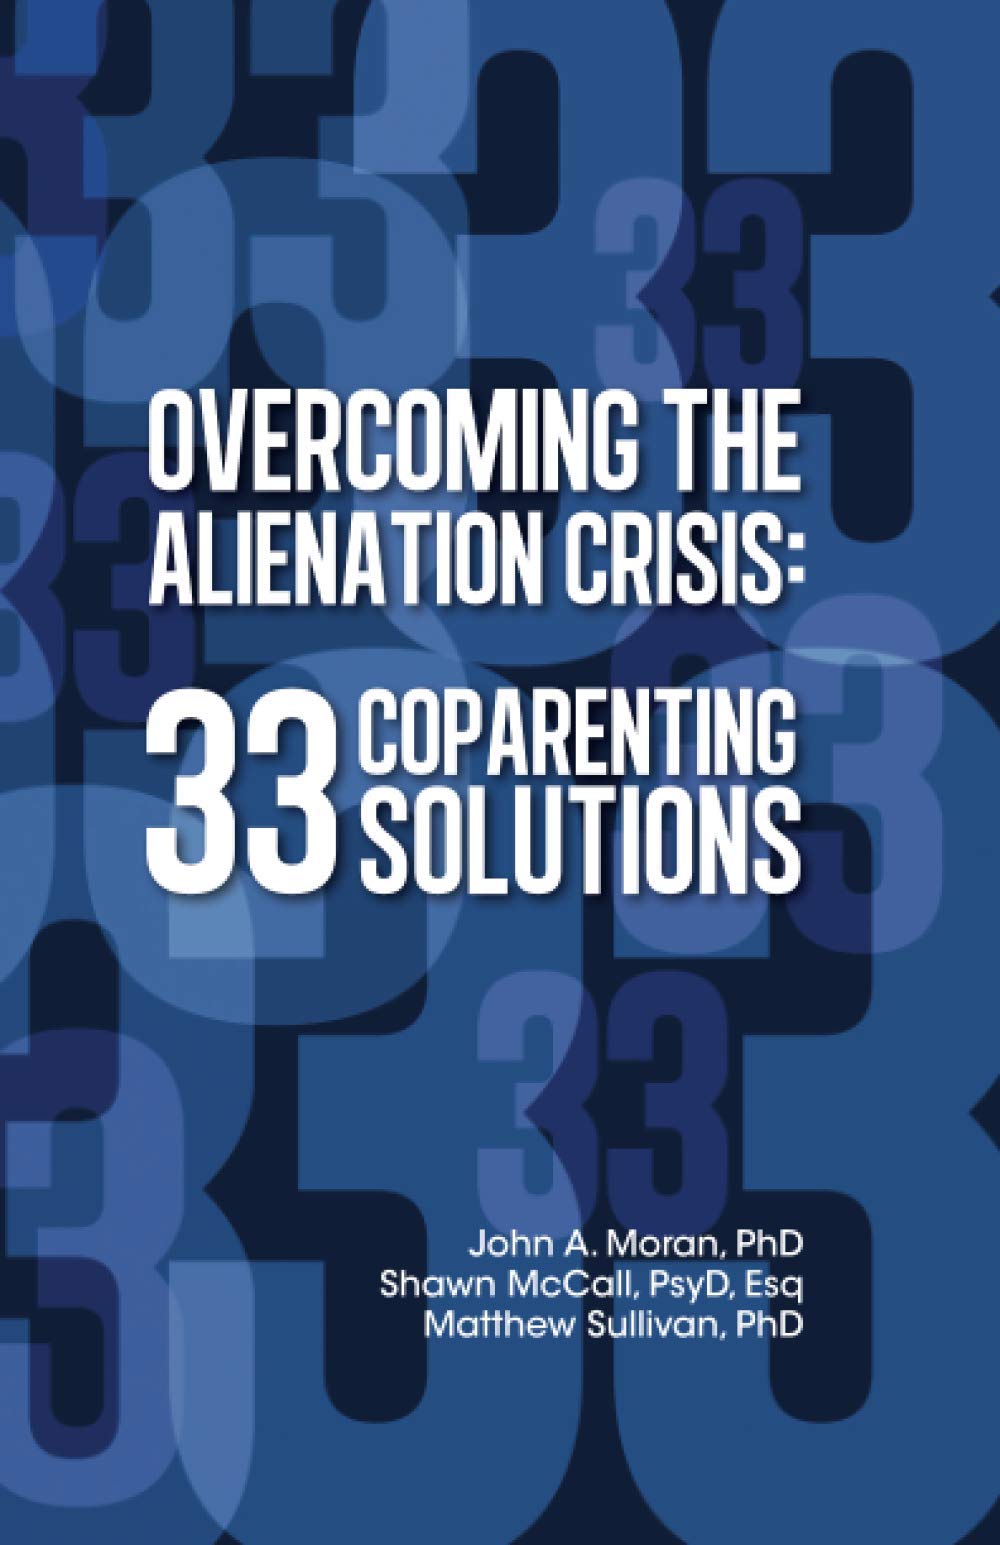 Overcoming the Alienation Crisis: 33 Coparenting Solutions Paperback – August 12, 2020